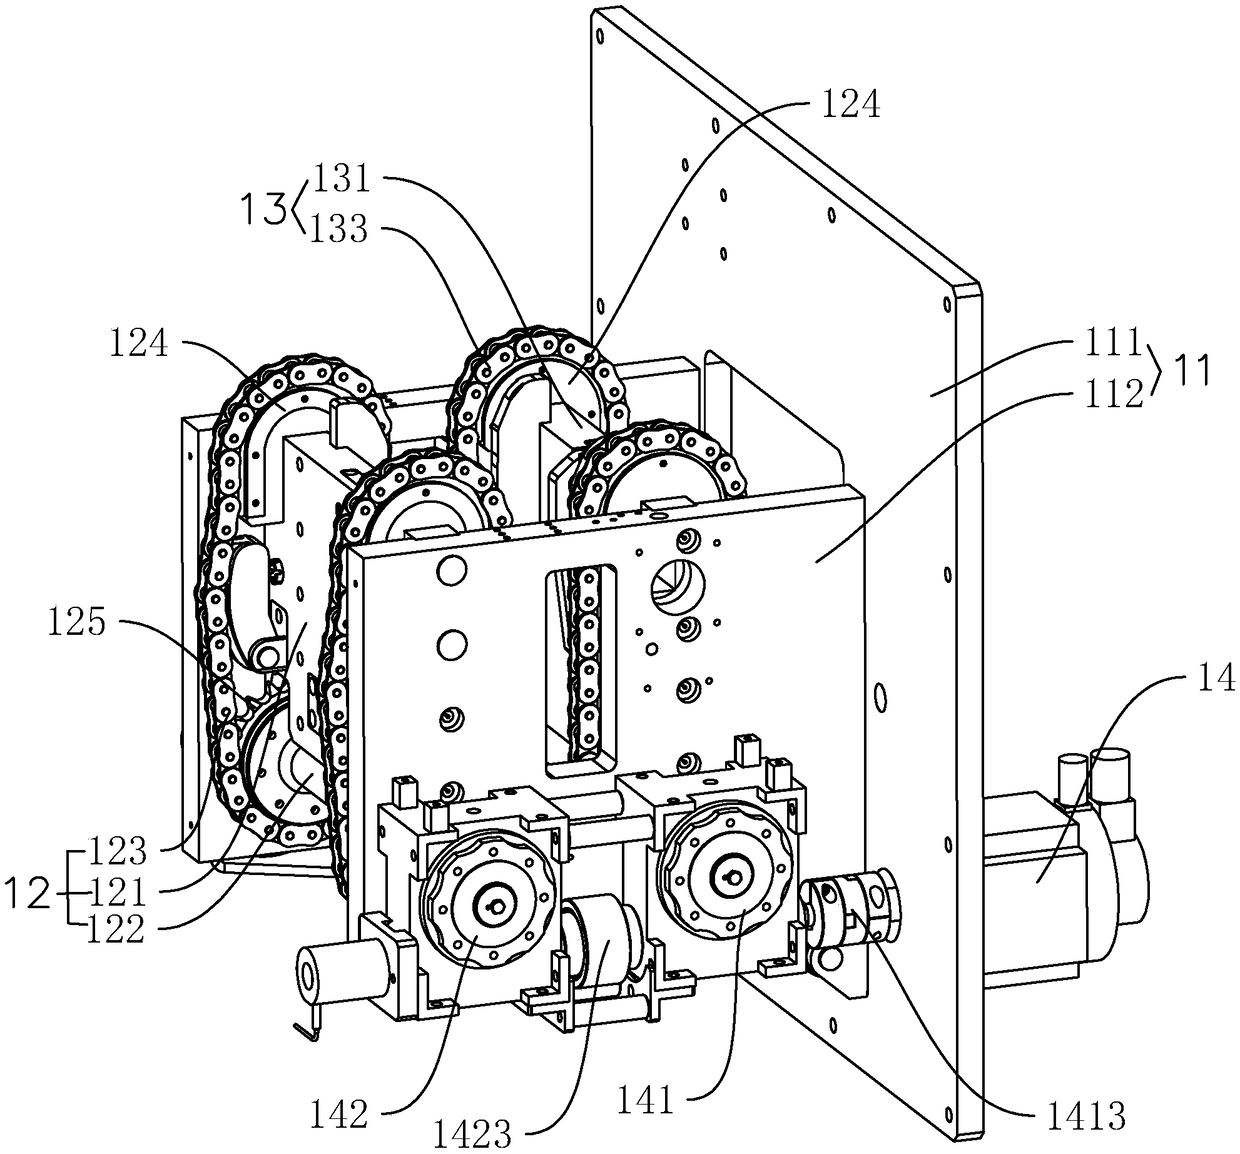 Main power system for transverse sealing clamping jaw mechanism